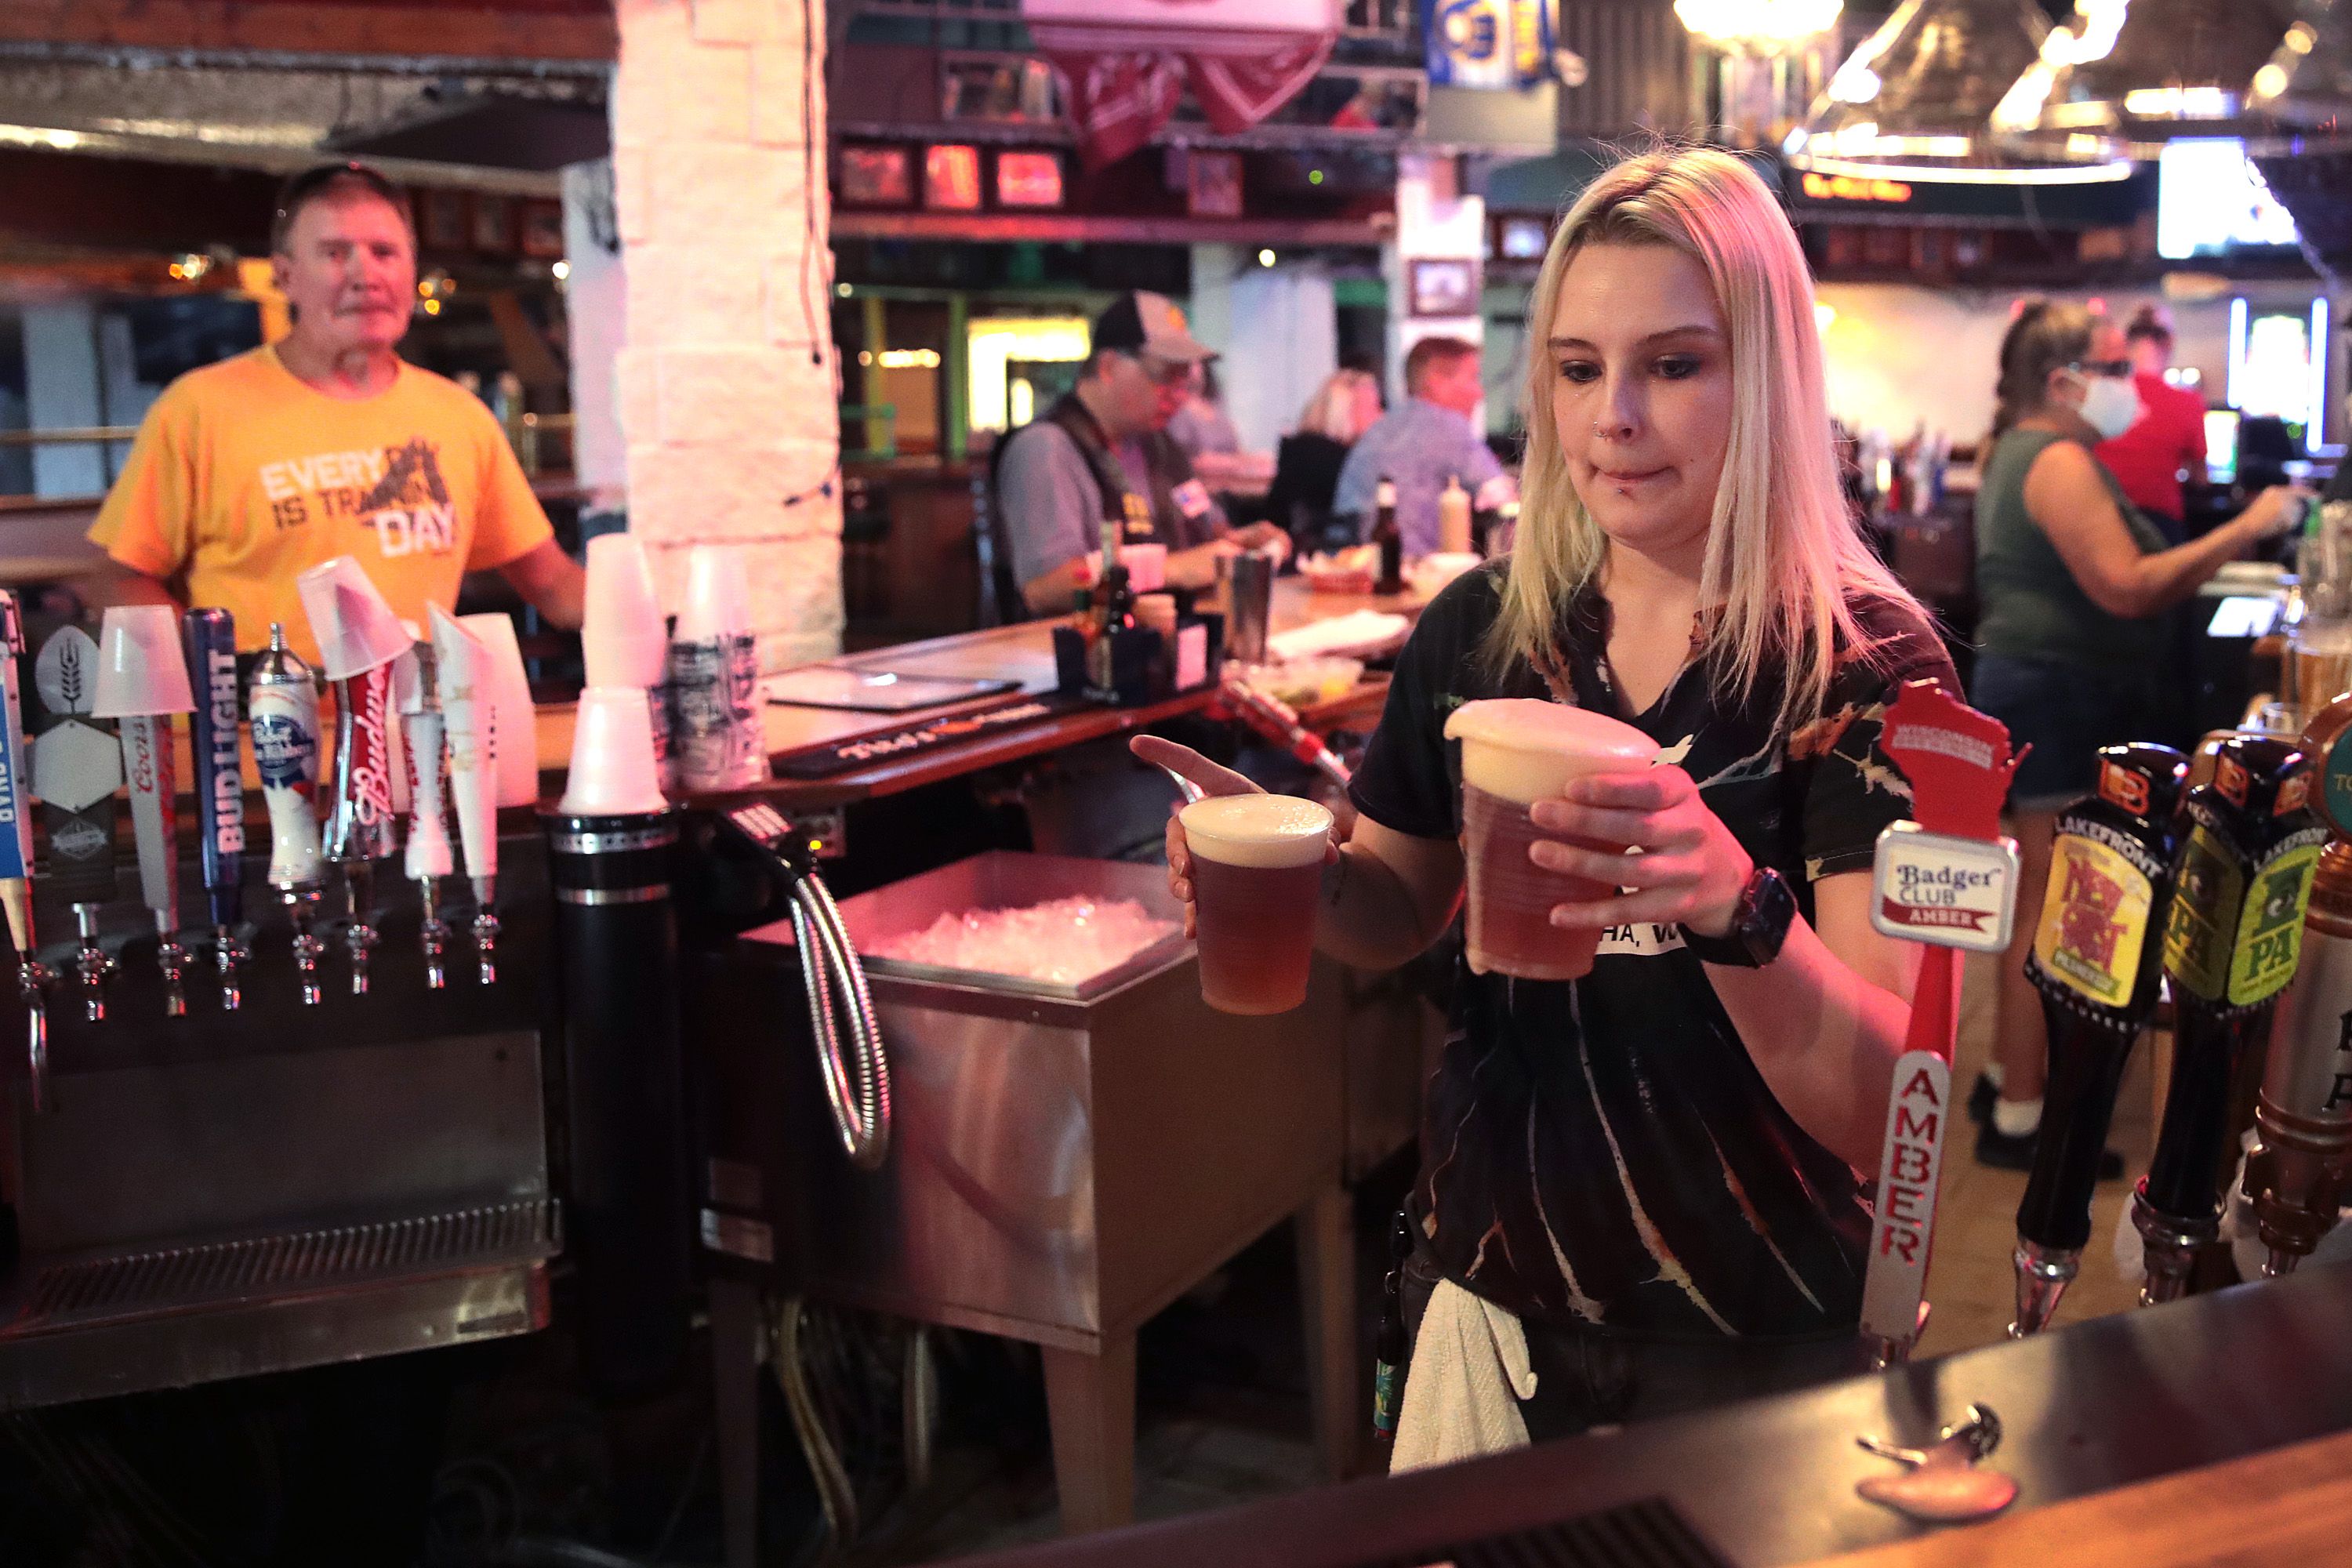 In this image, a female server carries two plastic cups of beer behind the bar counter